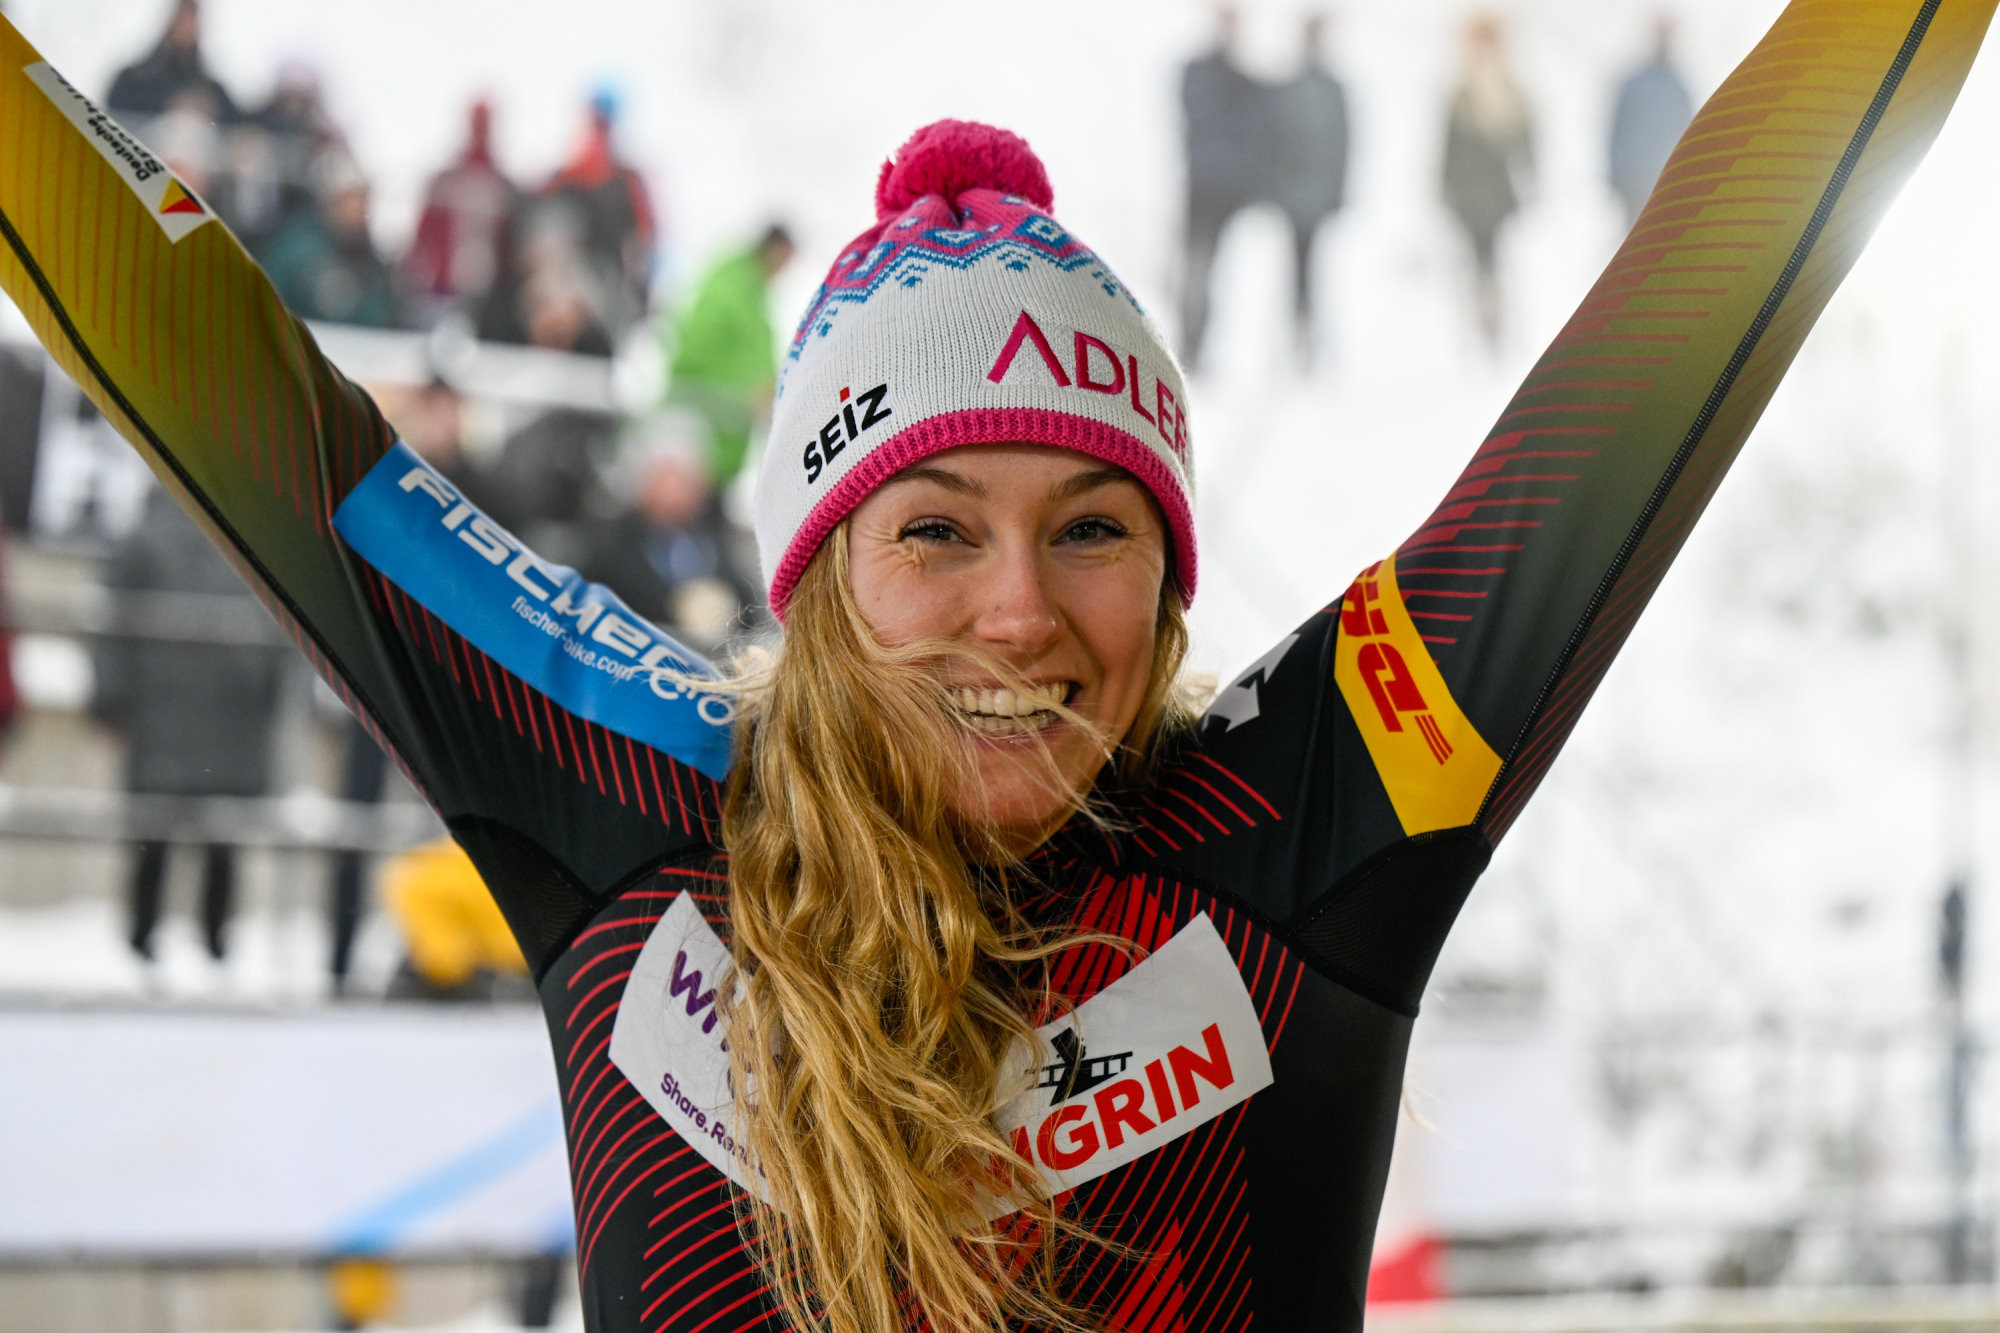 Germany's Laura Nolte finished second in the women's monobob World Cup event in Altenberg, and was the highest-ranked European athlete ©IBSF